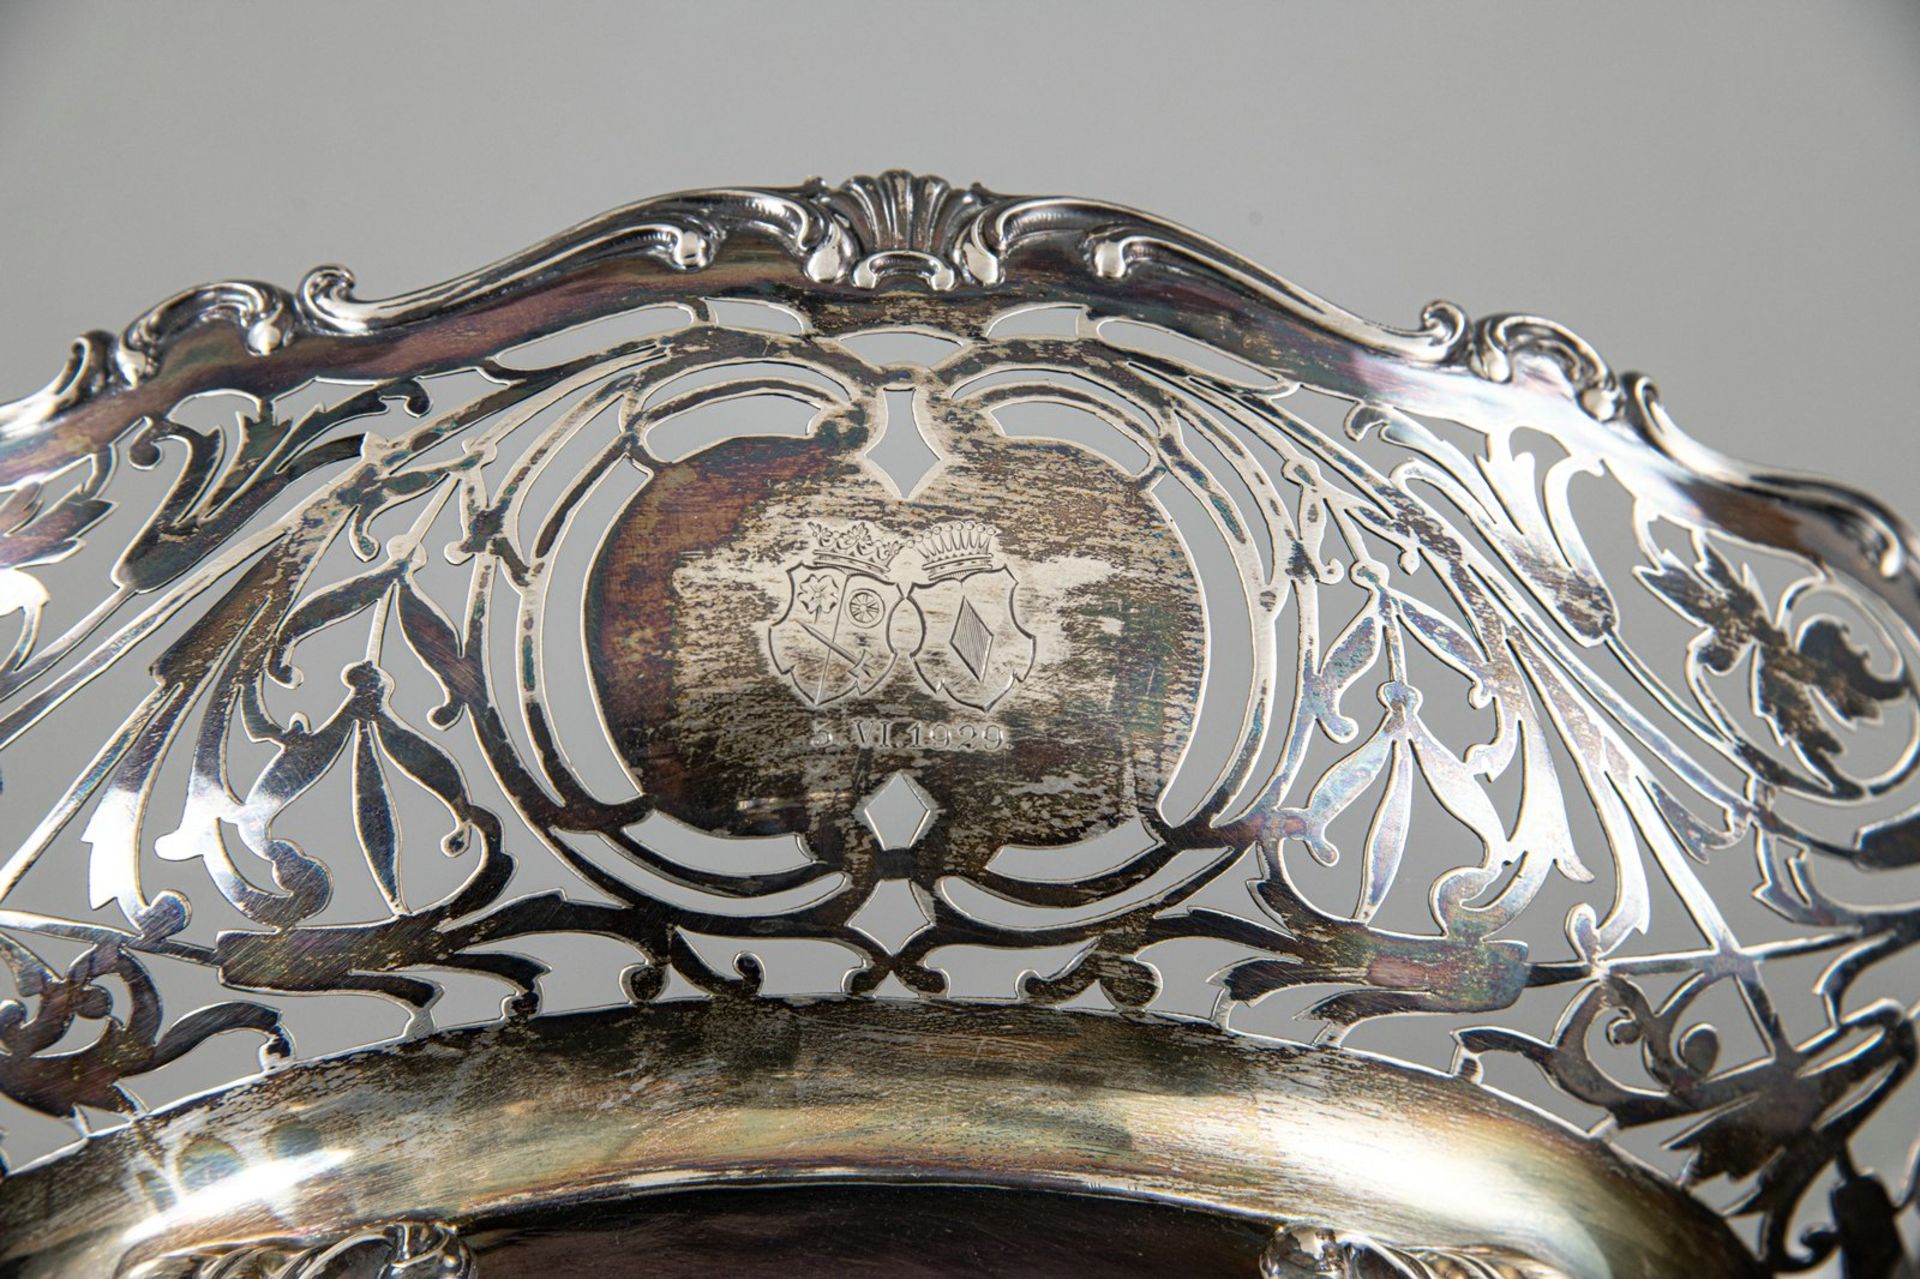 A SILVER OPENWORK BASKET, A SILVER DISH, TWO SILVER BOWLS - Image 5 of 6